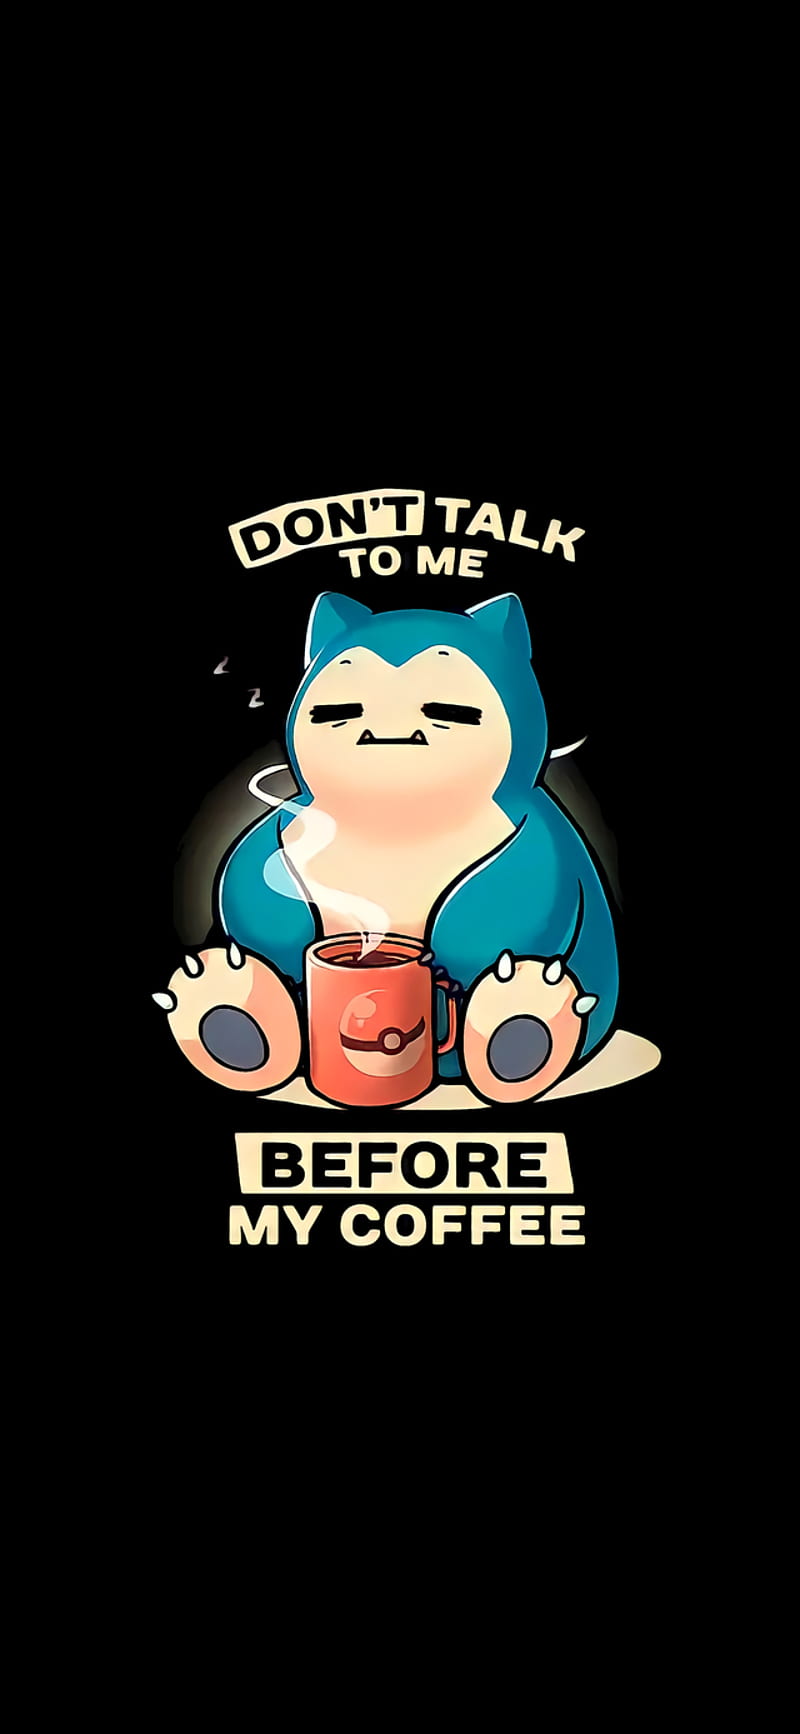 Don't Talk To Me Before My Coffee () : R Amoledbackground, Dont Talk To Me, HD phone wallpaper